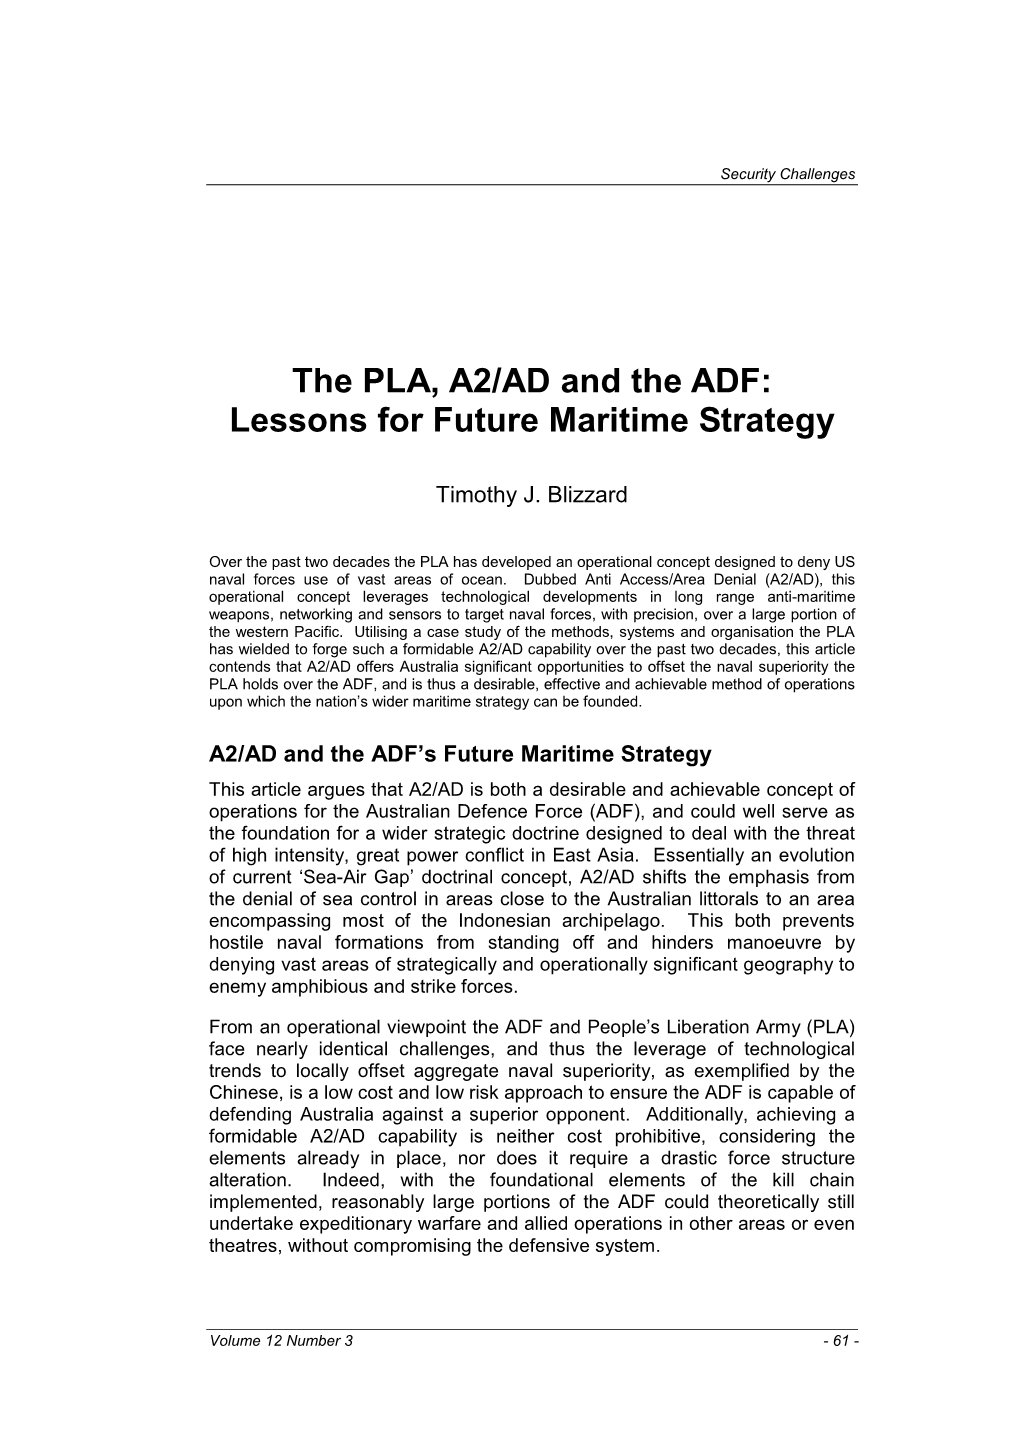 The PLA, A2/AD and the ADF: Lessons for Future Maritime Strategy